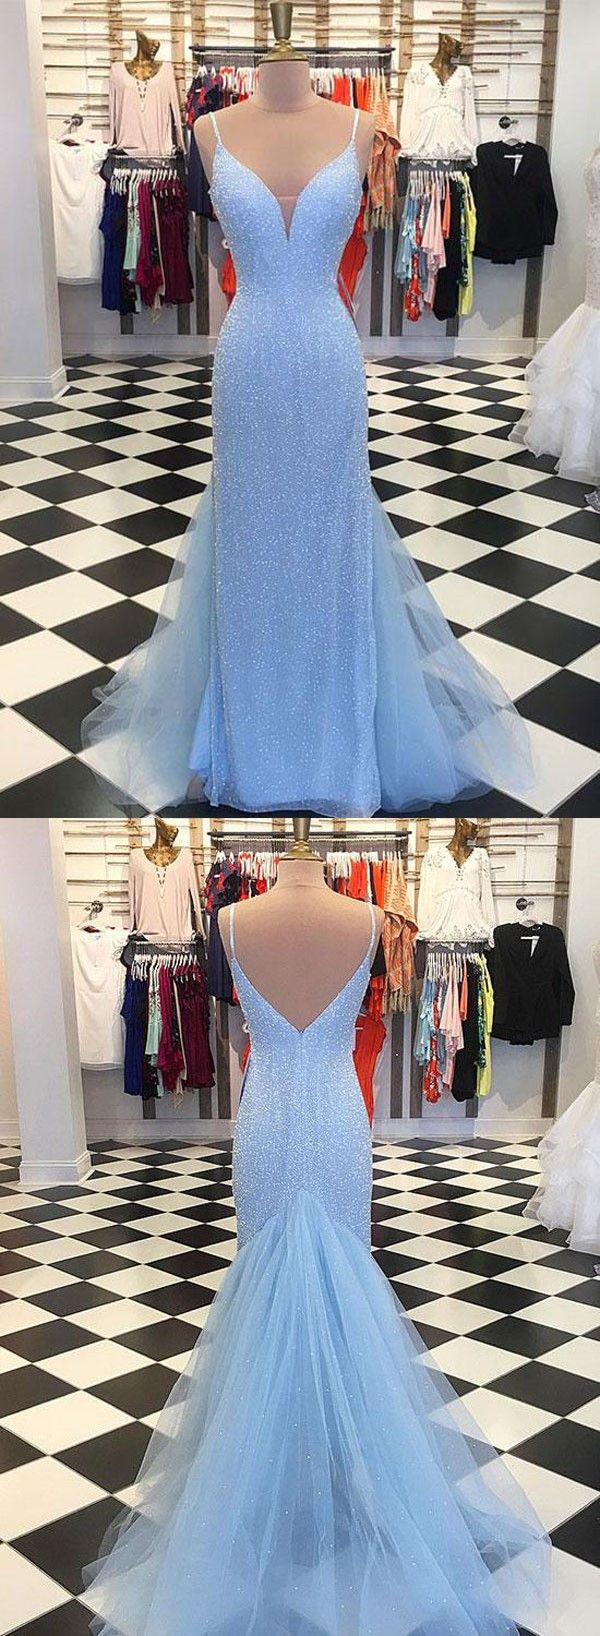 Mariage - Mermaid Spaghetti Straps Sweep Train Blue Sequined Backless Prom Dress